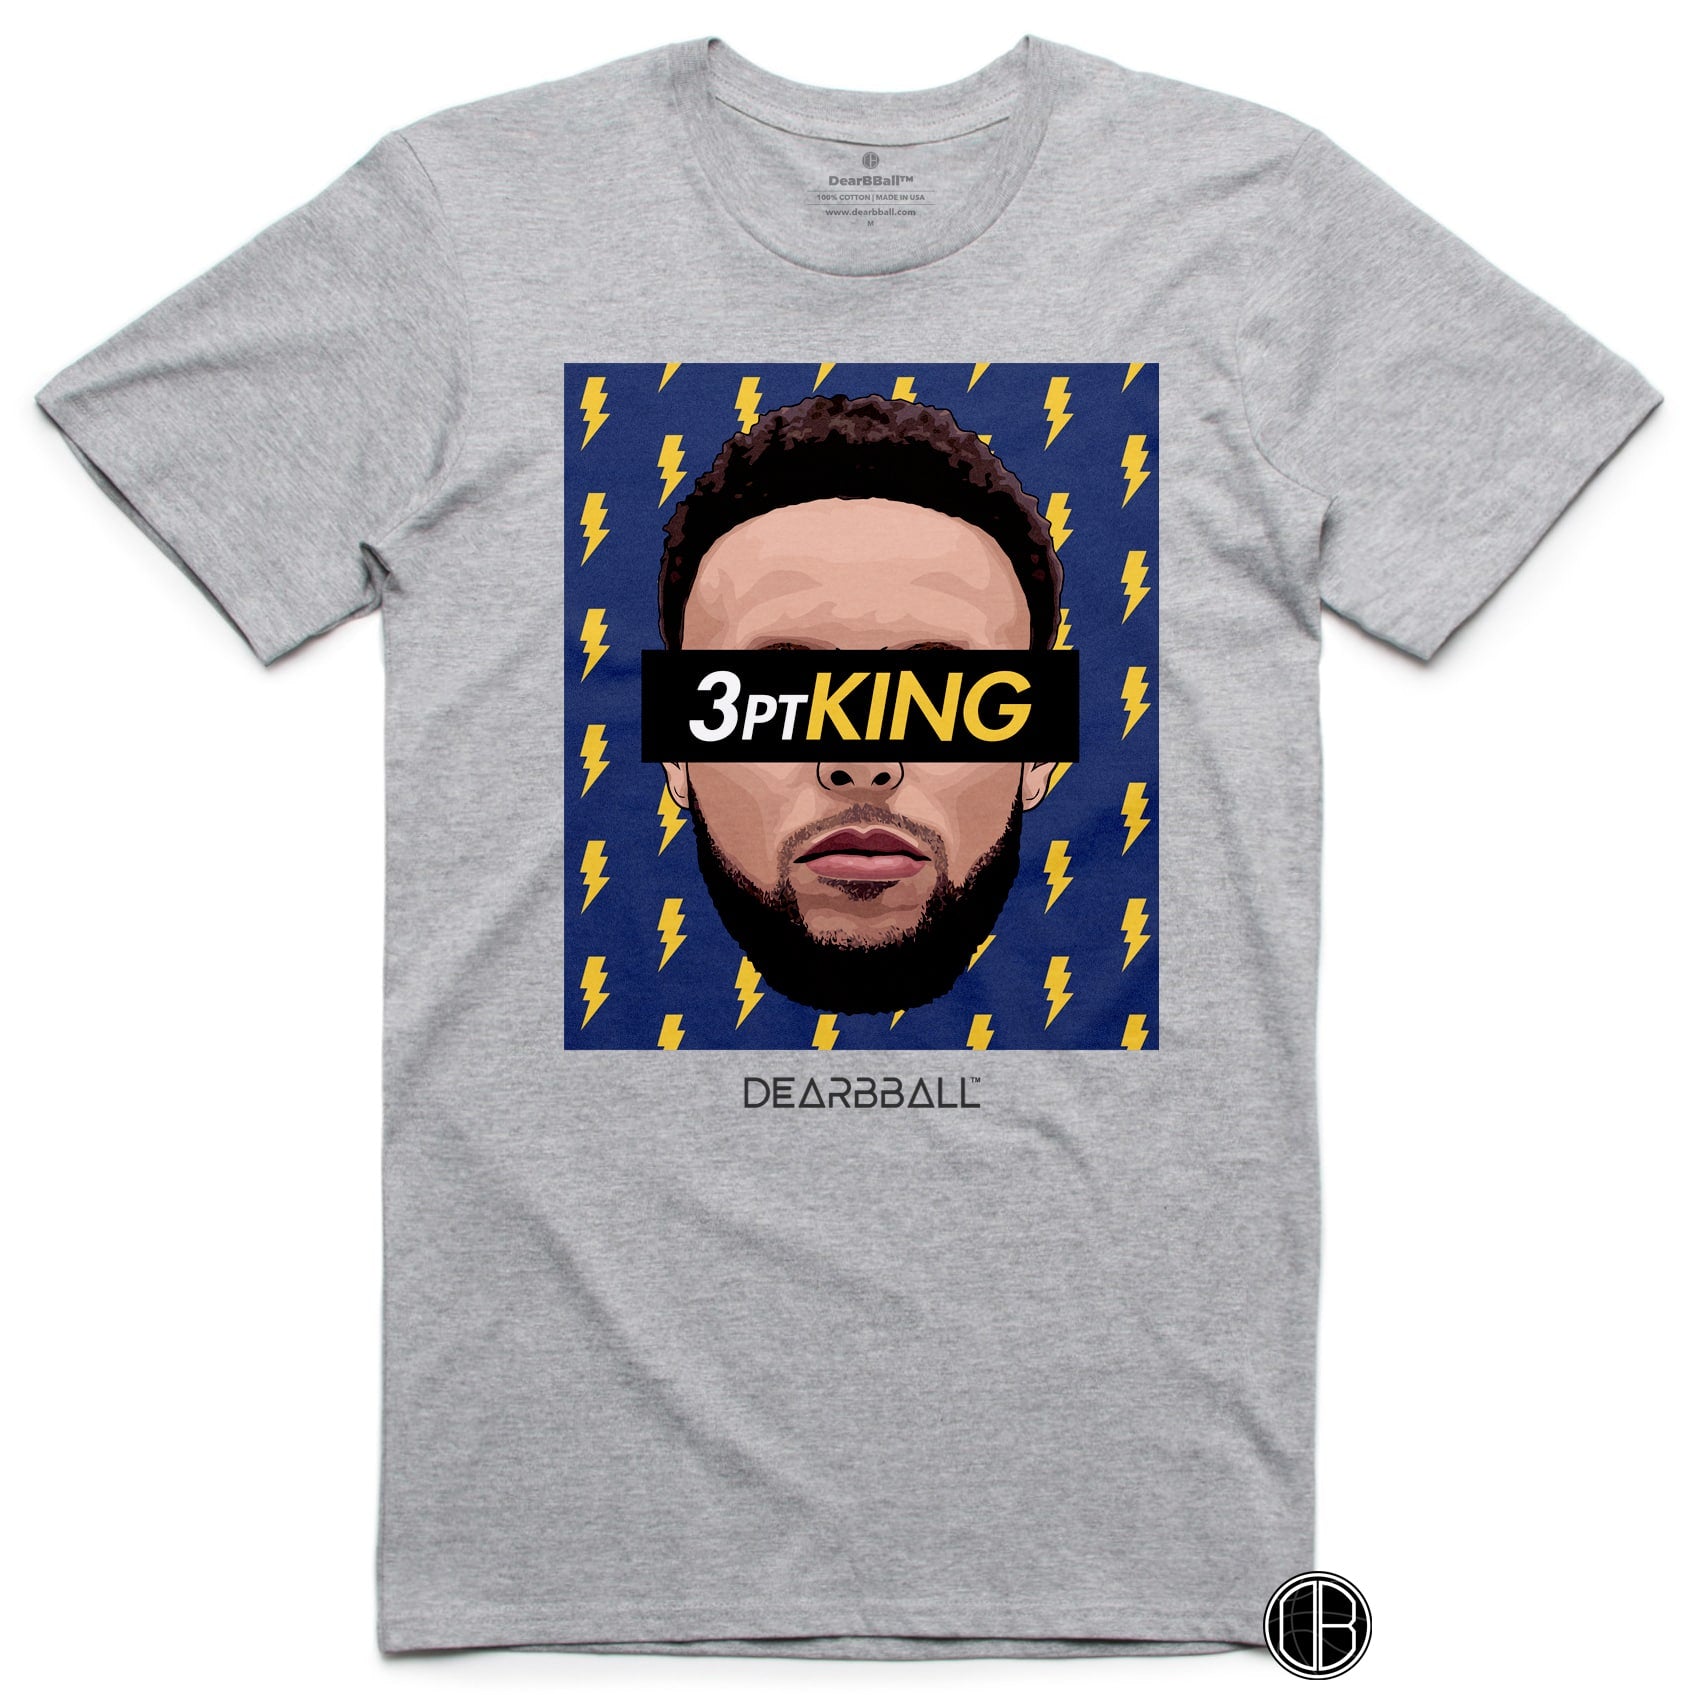 Child-T-Shirt-Stephen-Curry-Warriors-Golden-State-Dearbball-clothes-brand-france